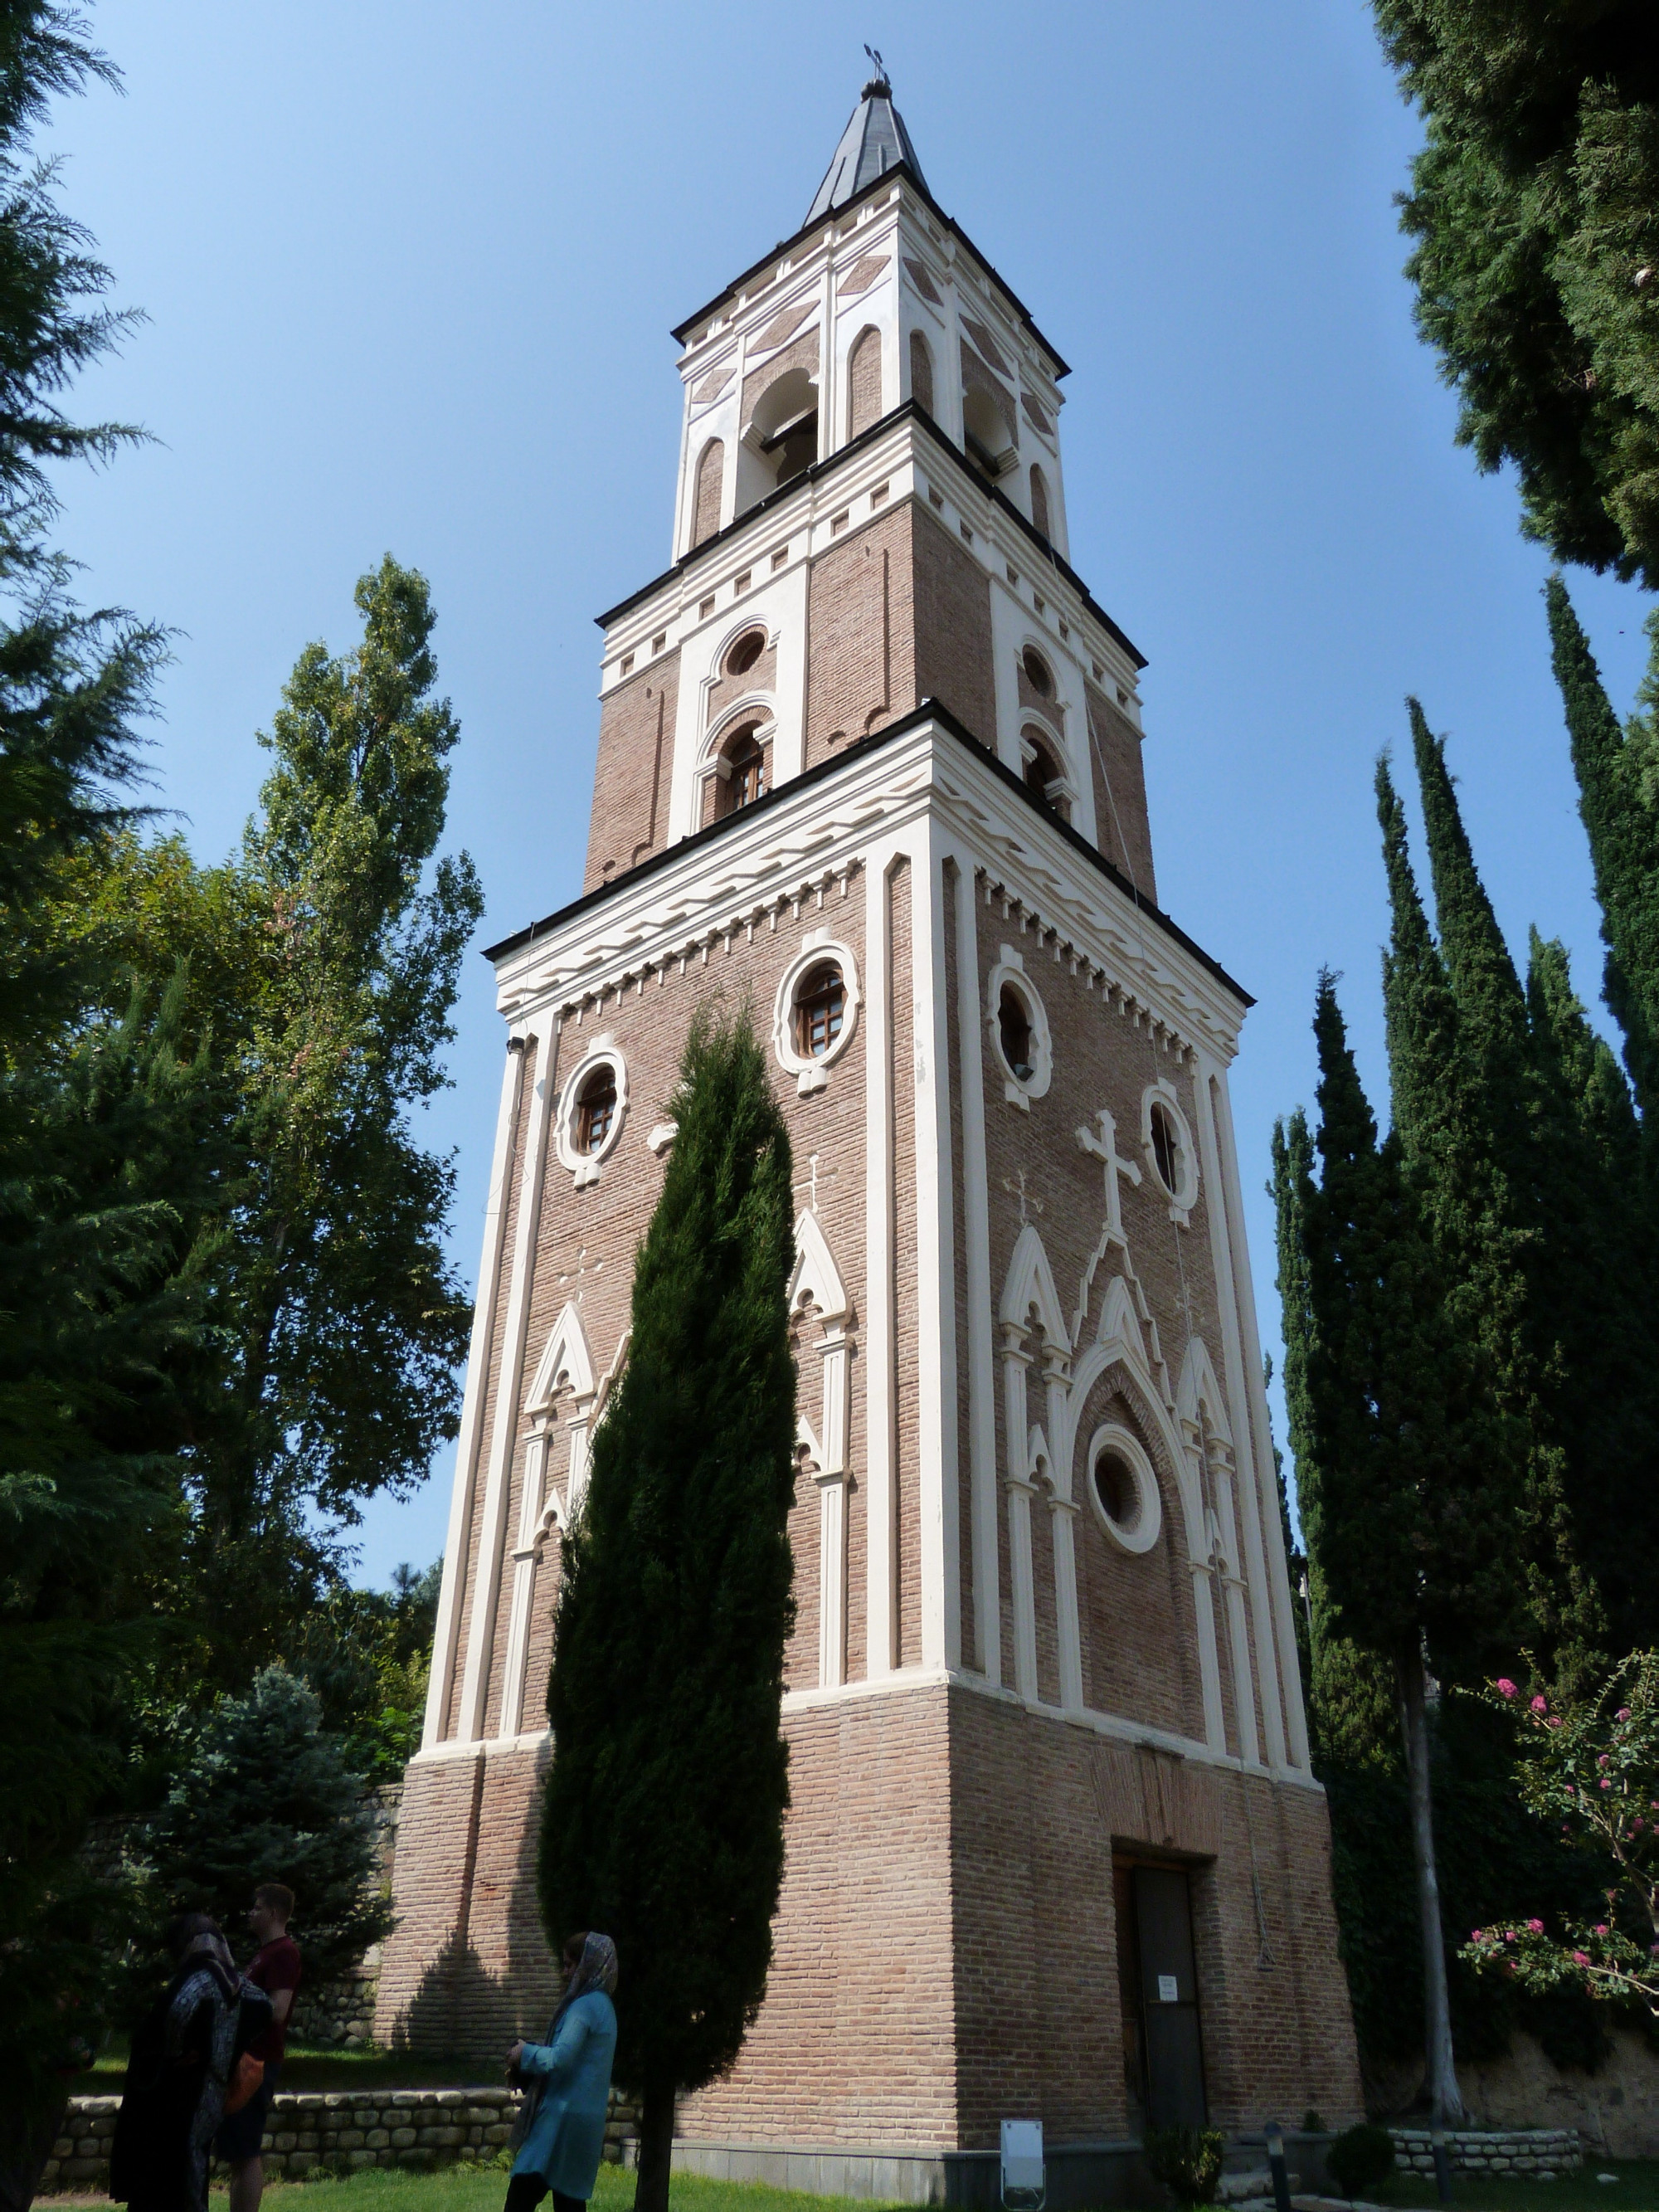 St George's Bell Tower